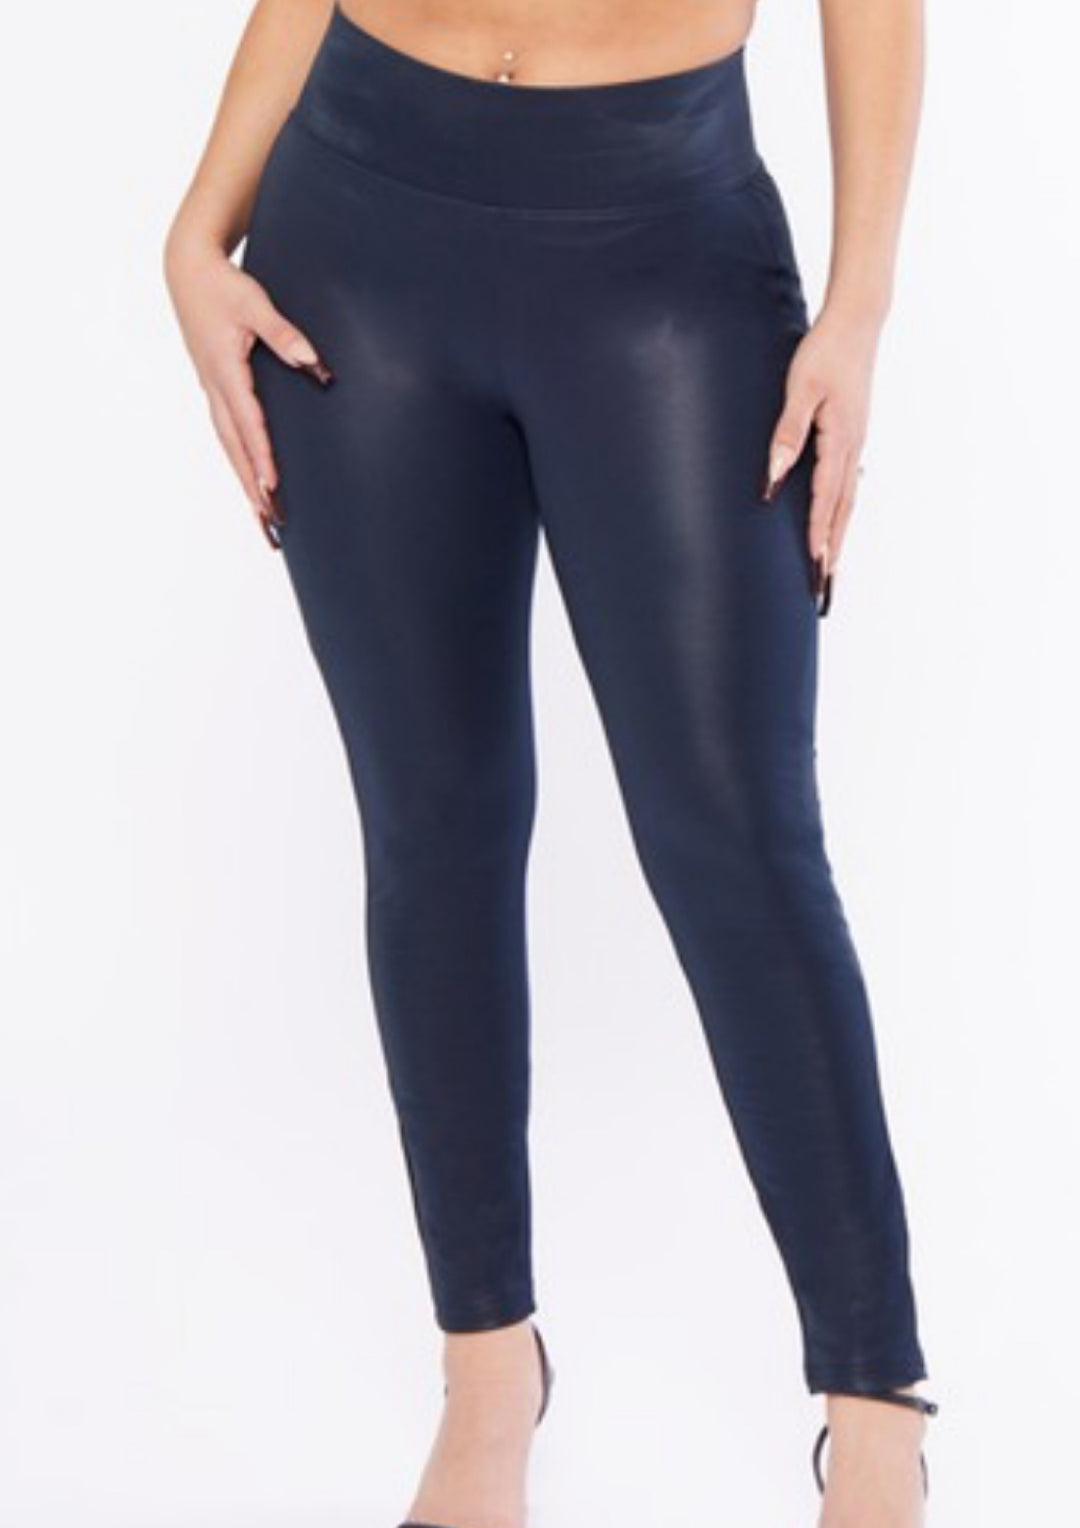 Smooth it out Faux Leather Leggings( More colors) - Missy Sizes Avail